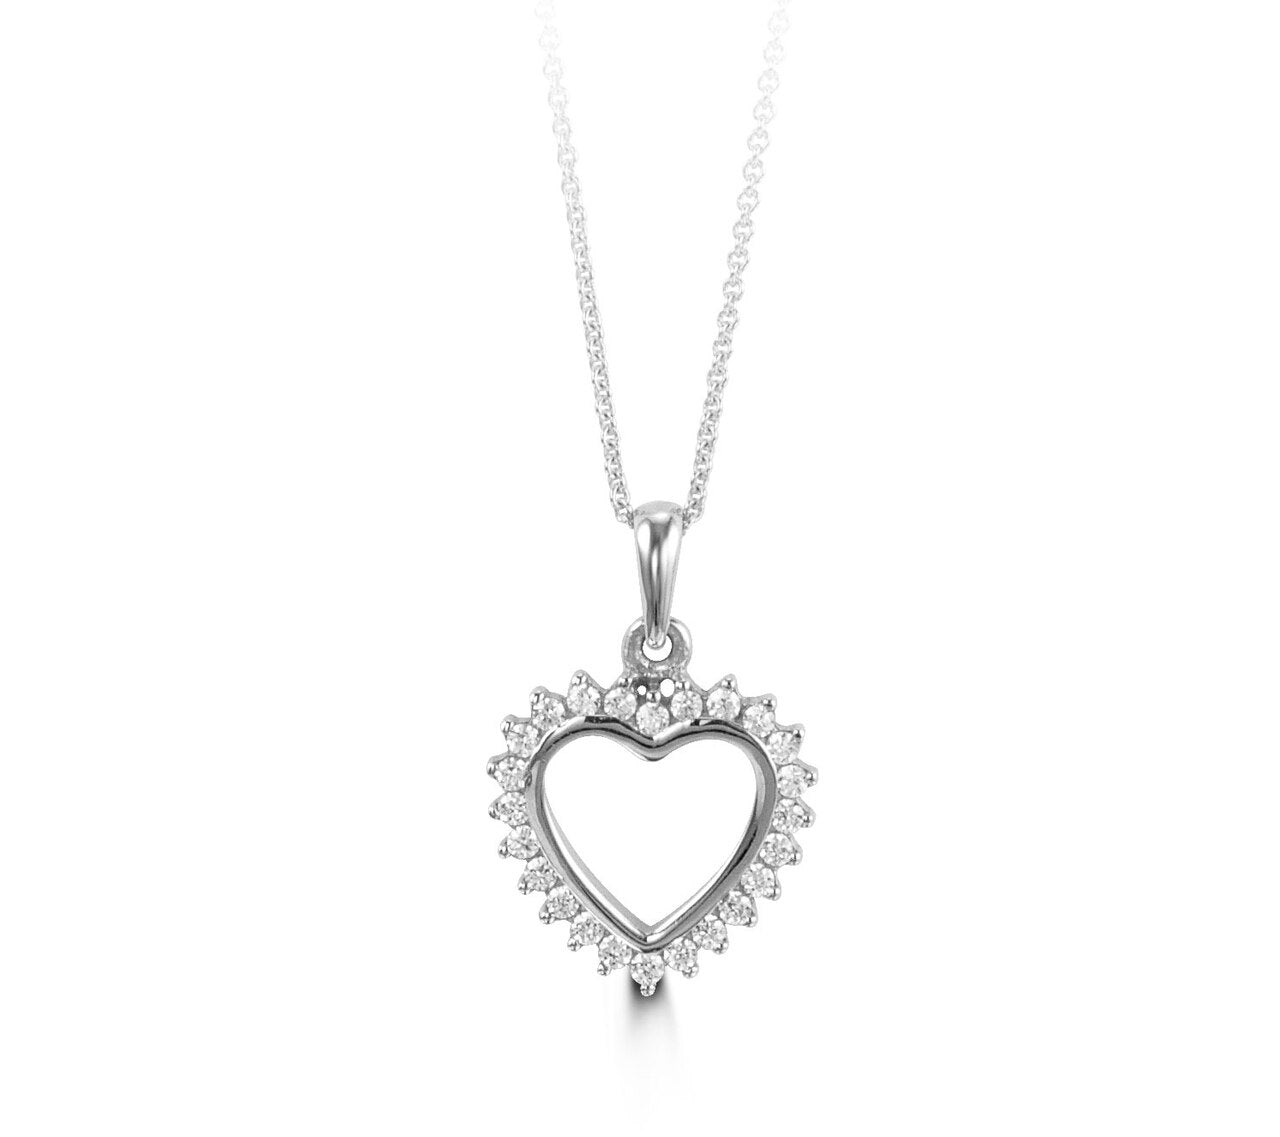 10K White Gold CZ Hear Pendant with Chain